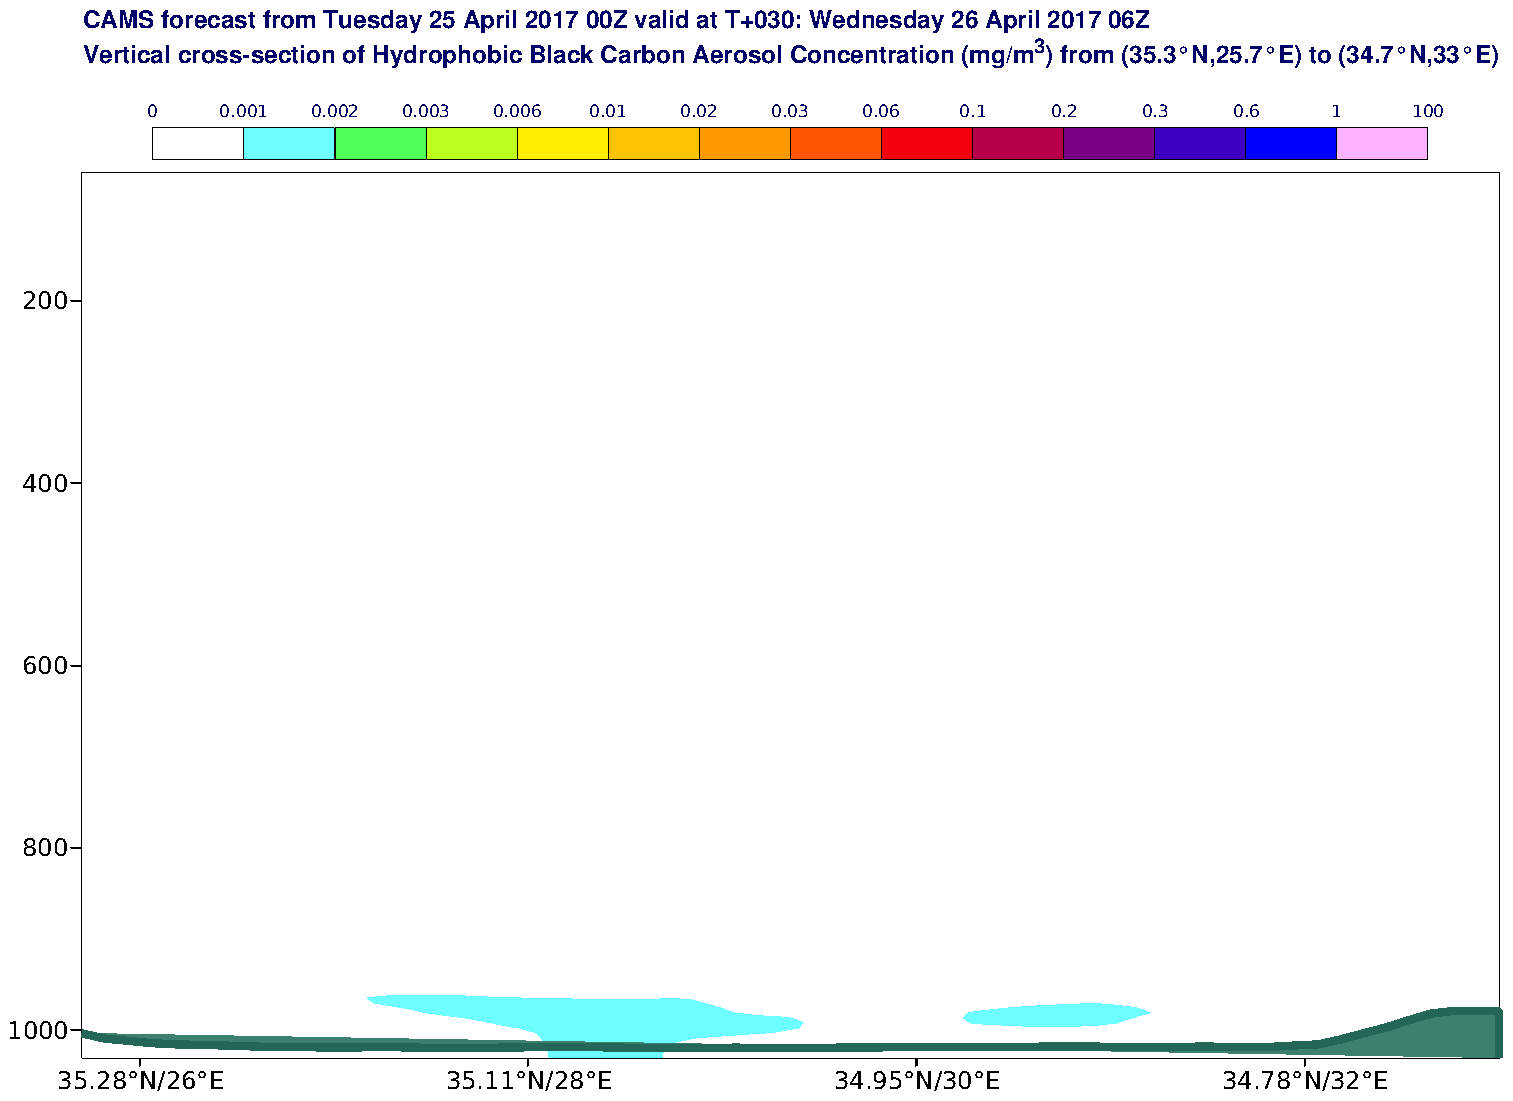 Vertical cross-section of Hydrophobic Black Carbon Aerosol Concentration (mg/m3) valid at T30 - 2017-04-26 06:00